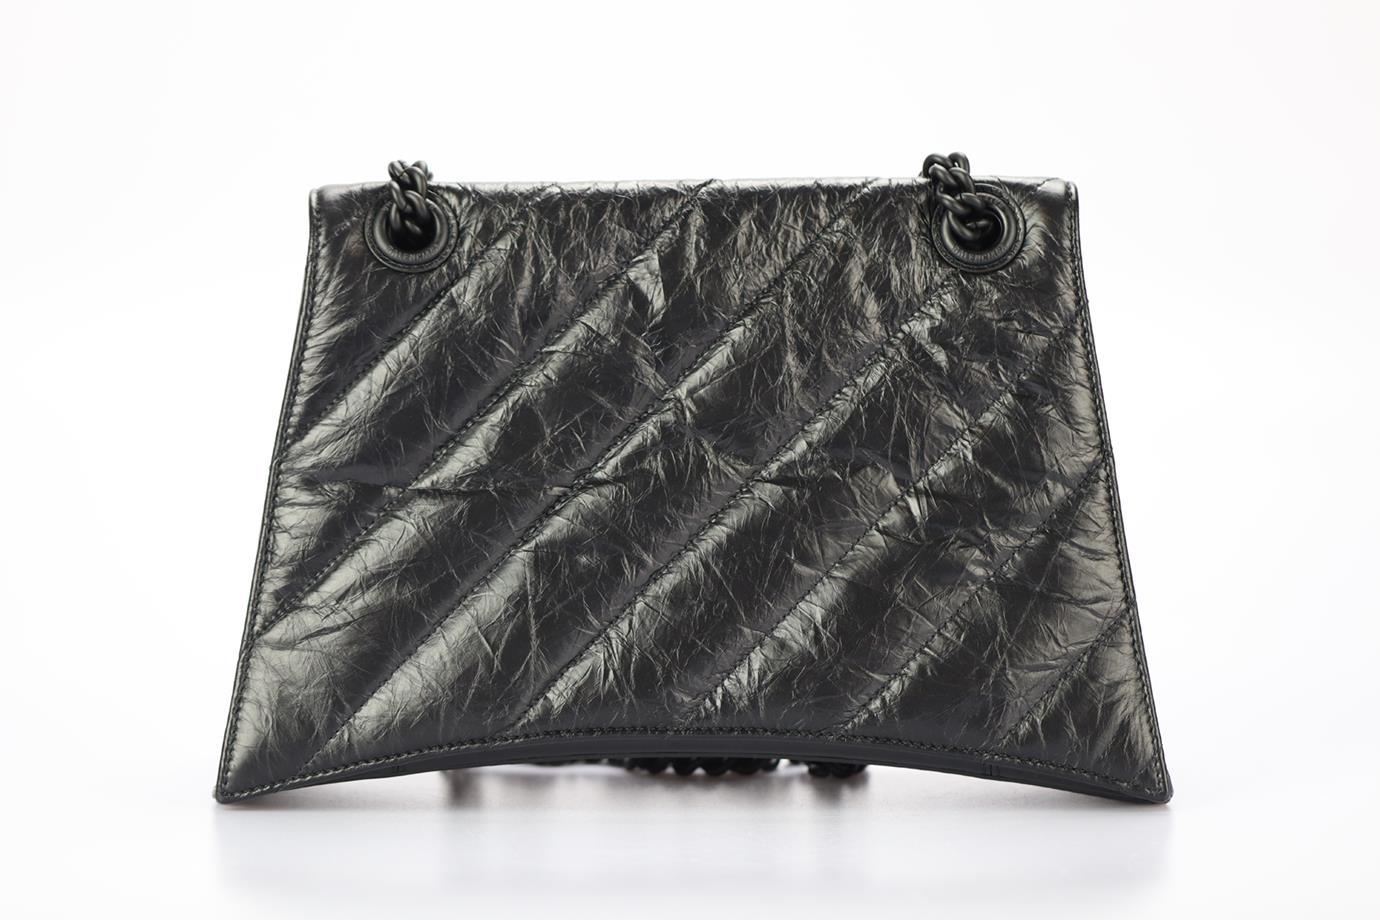 Balenciaga Crush Medium Quilted Leather Shoulder Bag In Excellent Condition For Sale In London, GB